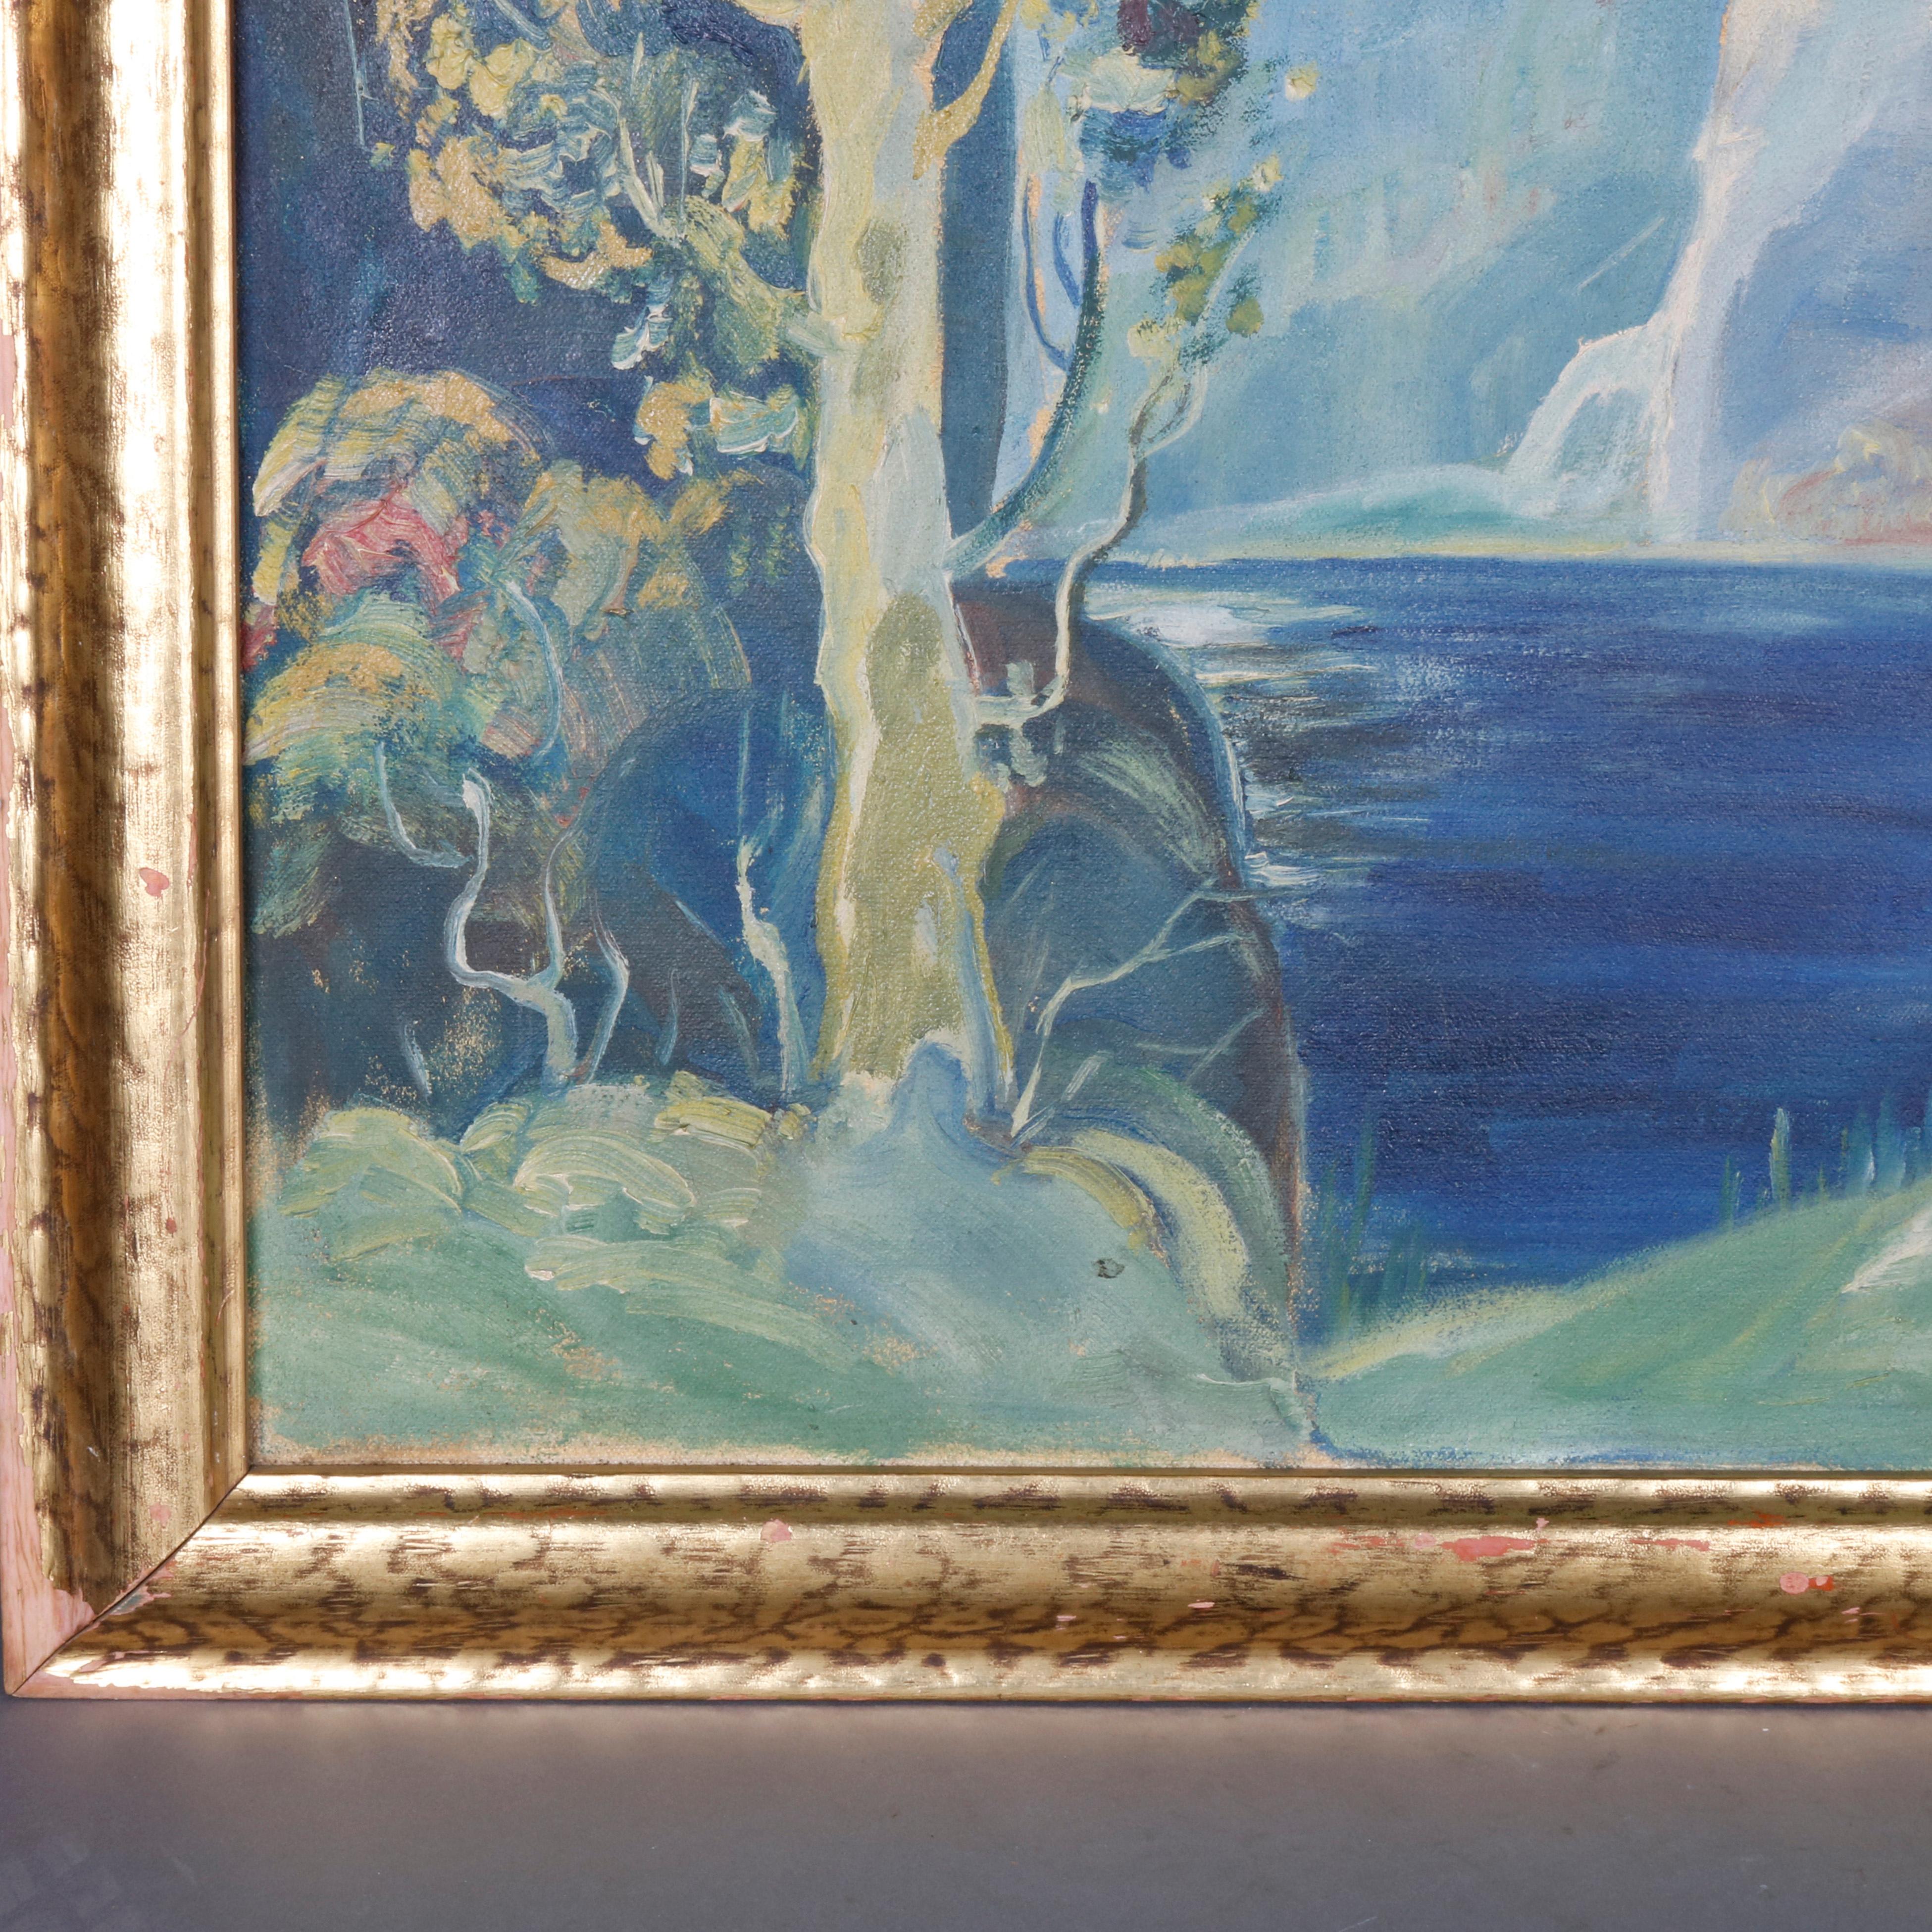 Hand-Painted Antique Arts & Crafts Impressionist Oil on Canvas Landscape Painting, circa 1930